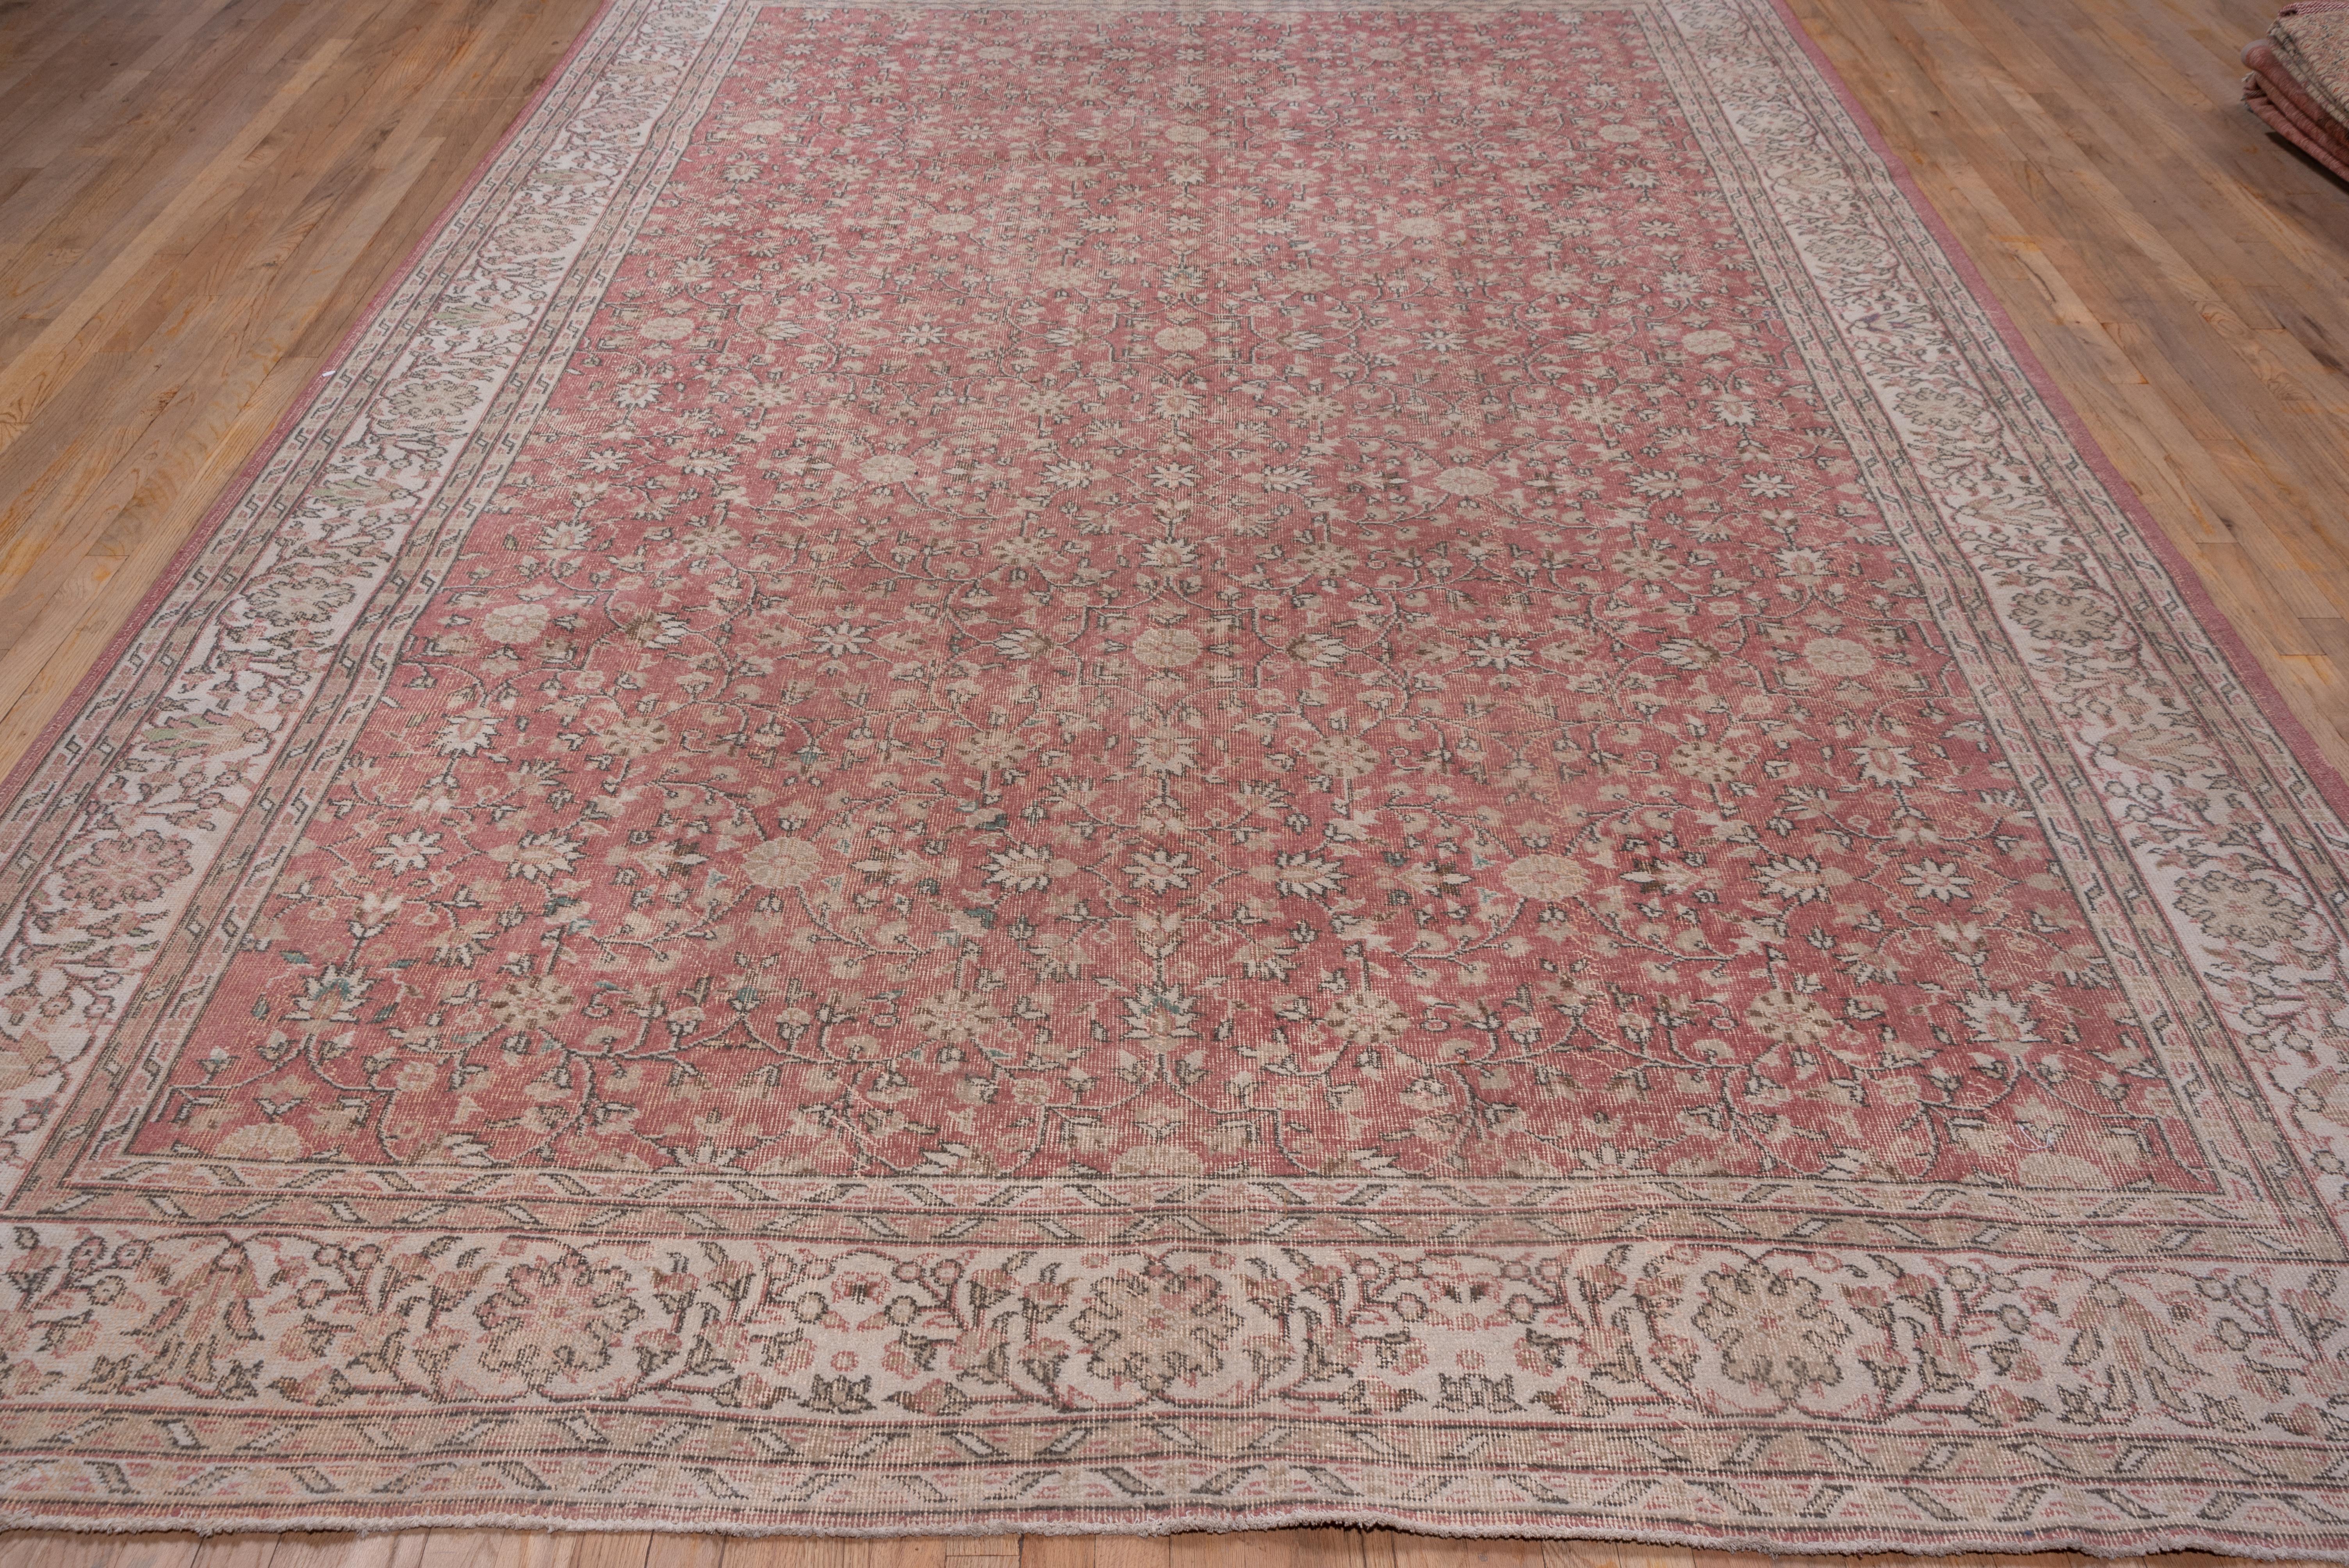 This Turkish town room size carpet has selective color corrosion. The taupe field displays rosette-centred octogrammes amidst curving, flowering stems, petal palmettes, a petal rosettes, detailed in cream, khaki, and dark brown. The cream main